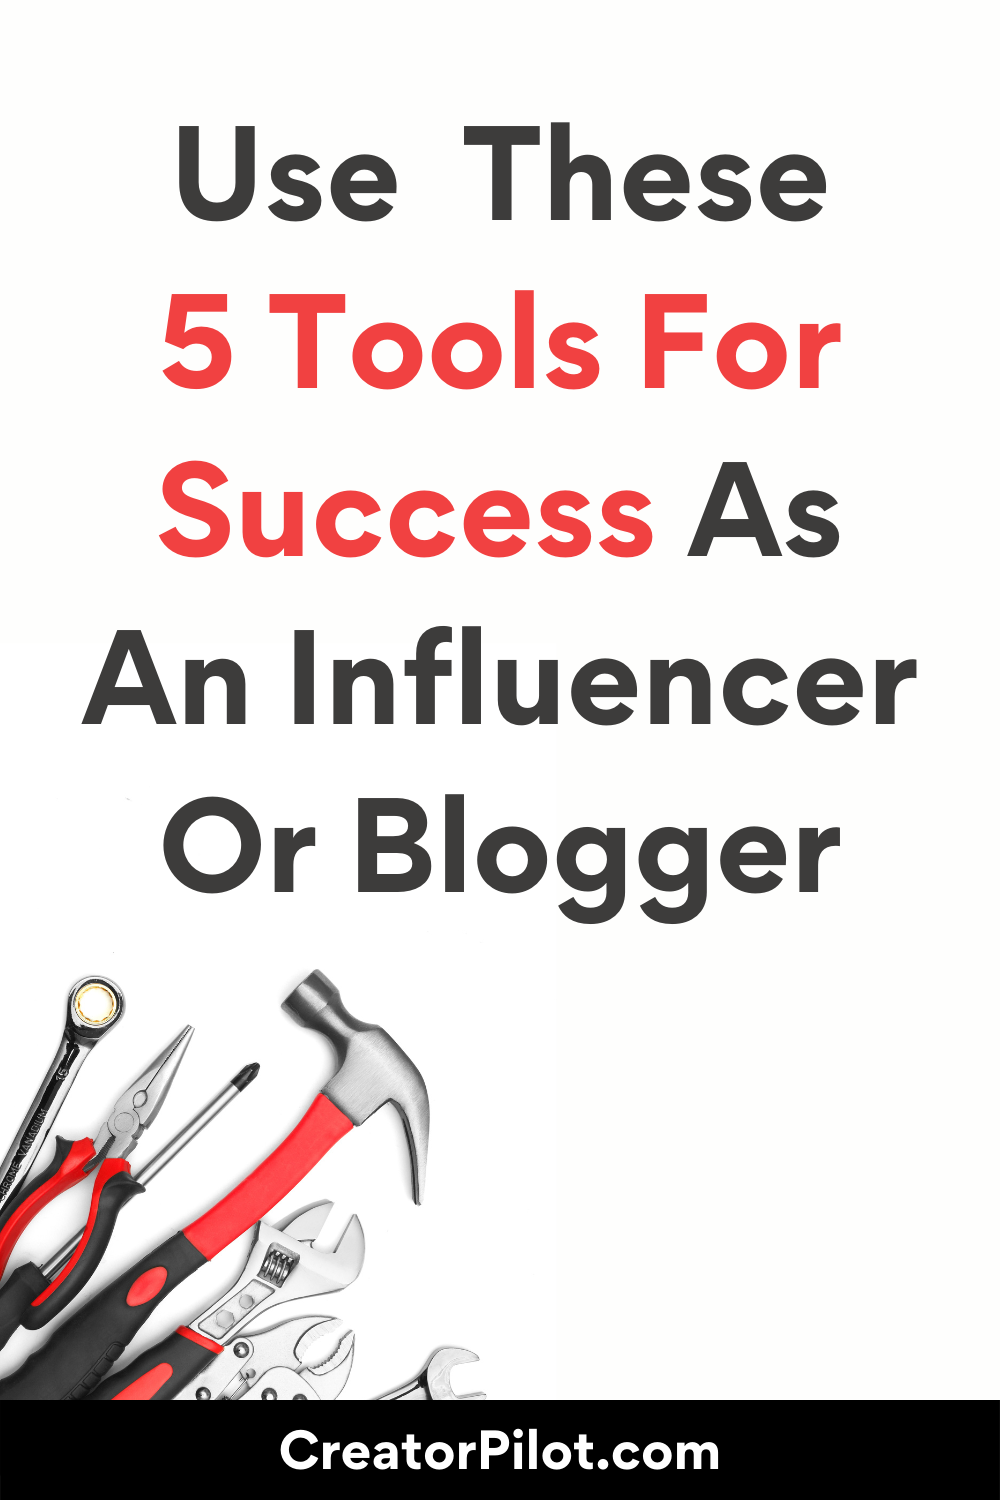 use these 5 tools for success as an influencer